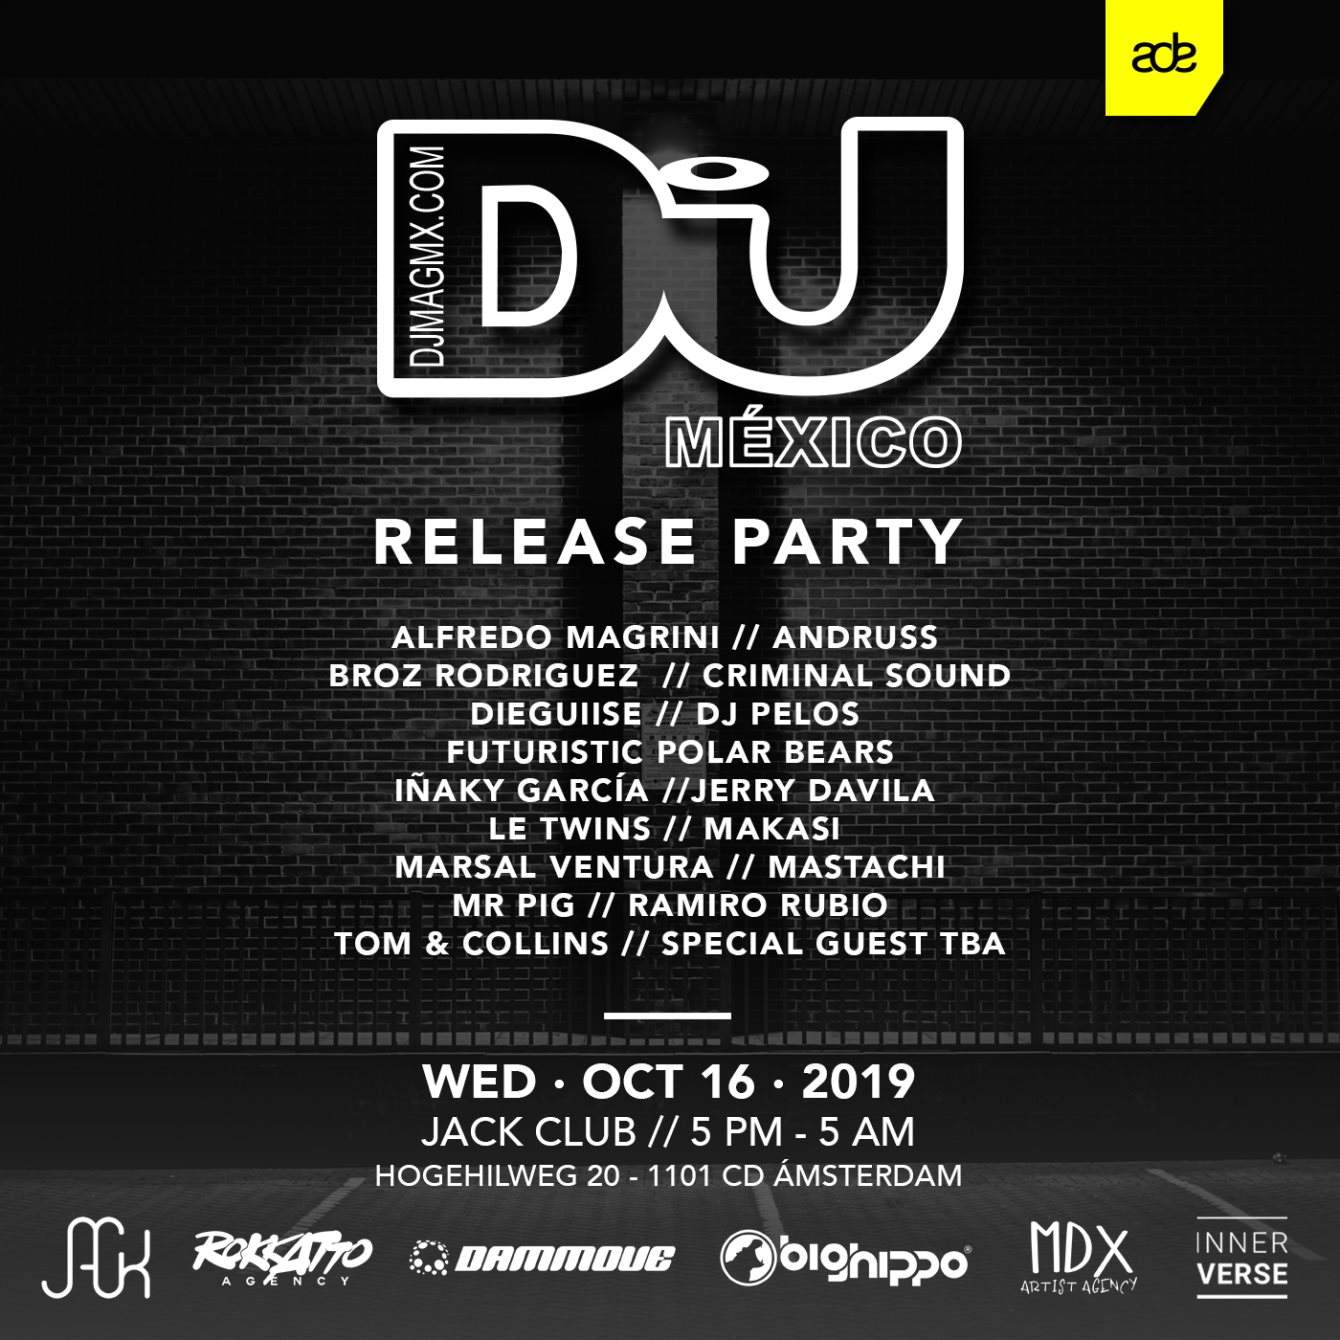 Jack x Innerverse Invites: DJ Mag Mexico Release Party ADE - フライヤー裏